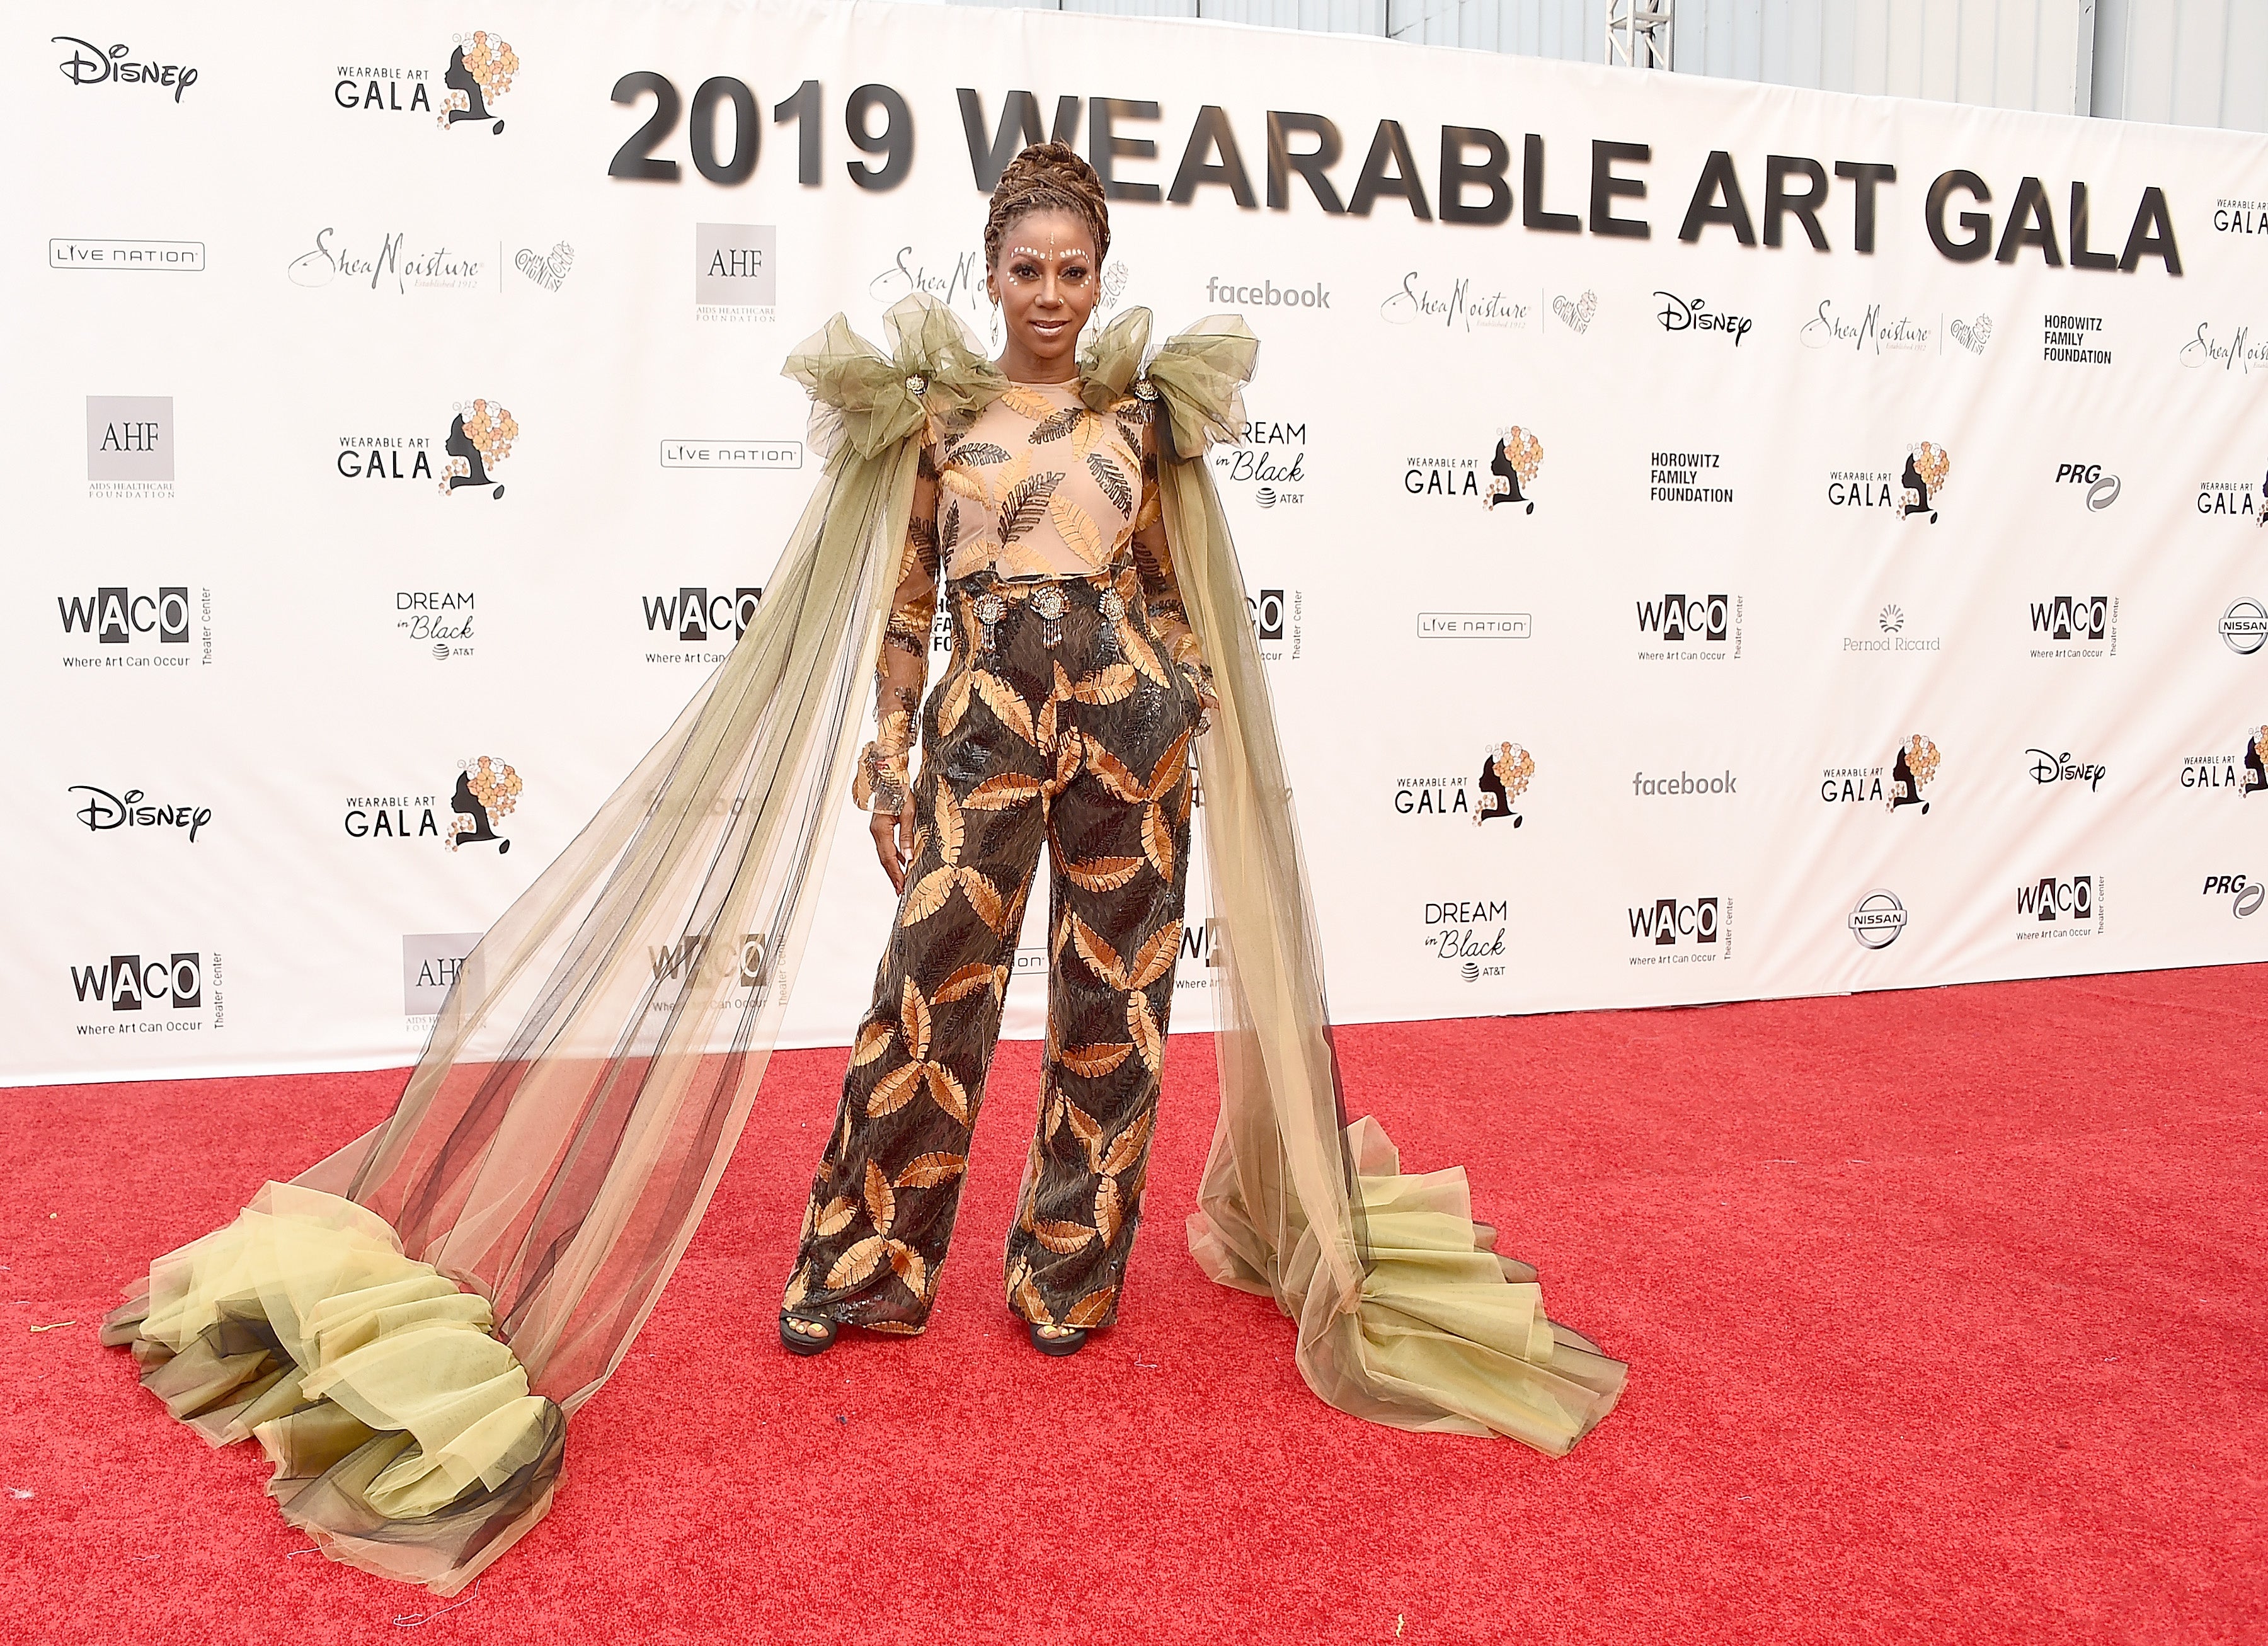 Beyoncé and Blue Ivy Didn’t Hold Back In ‘Lion King’-Themed Wearable Art Gala